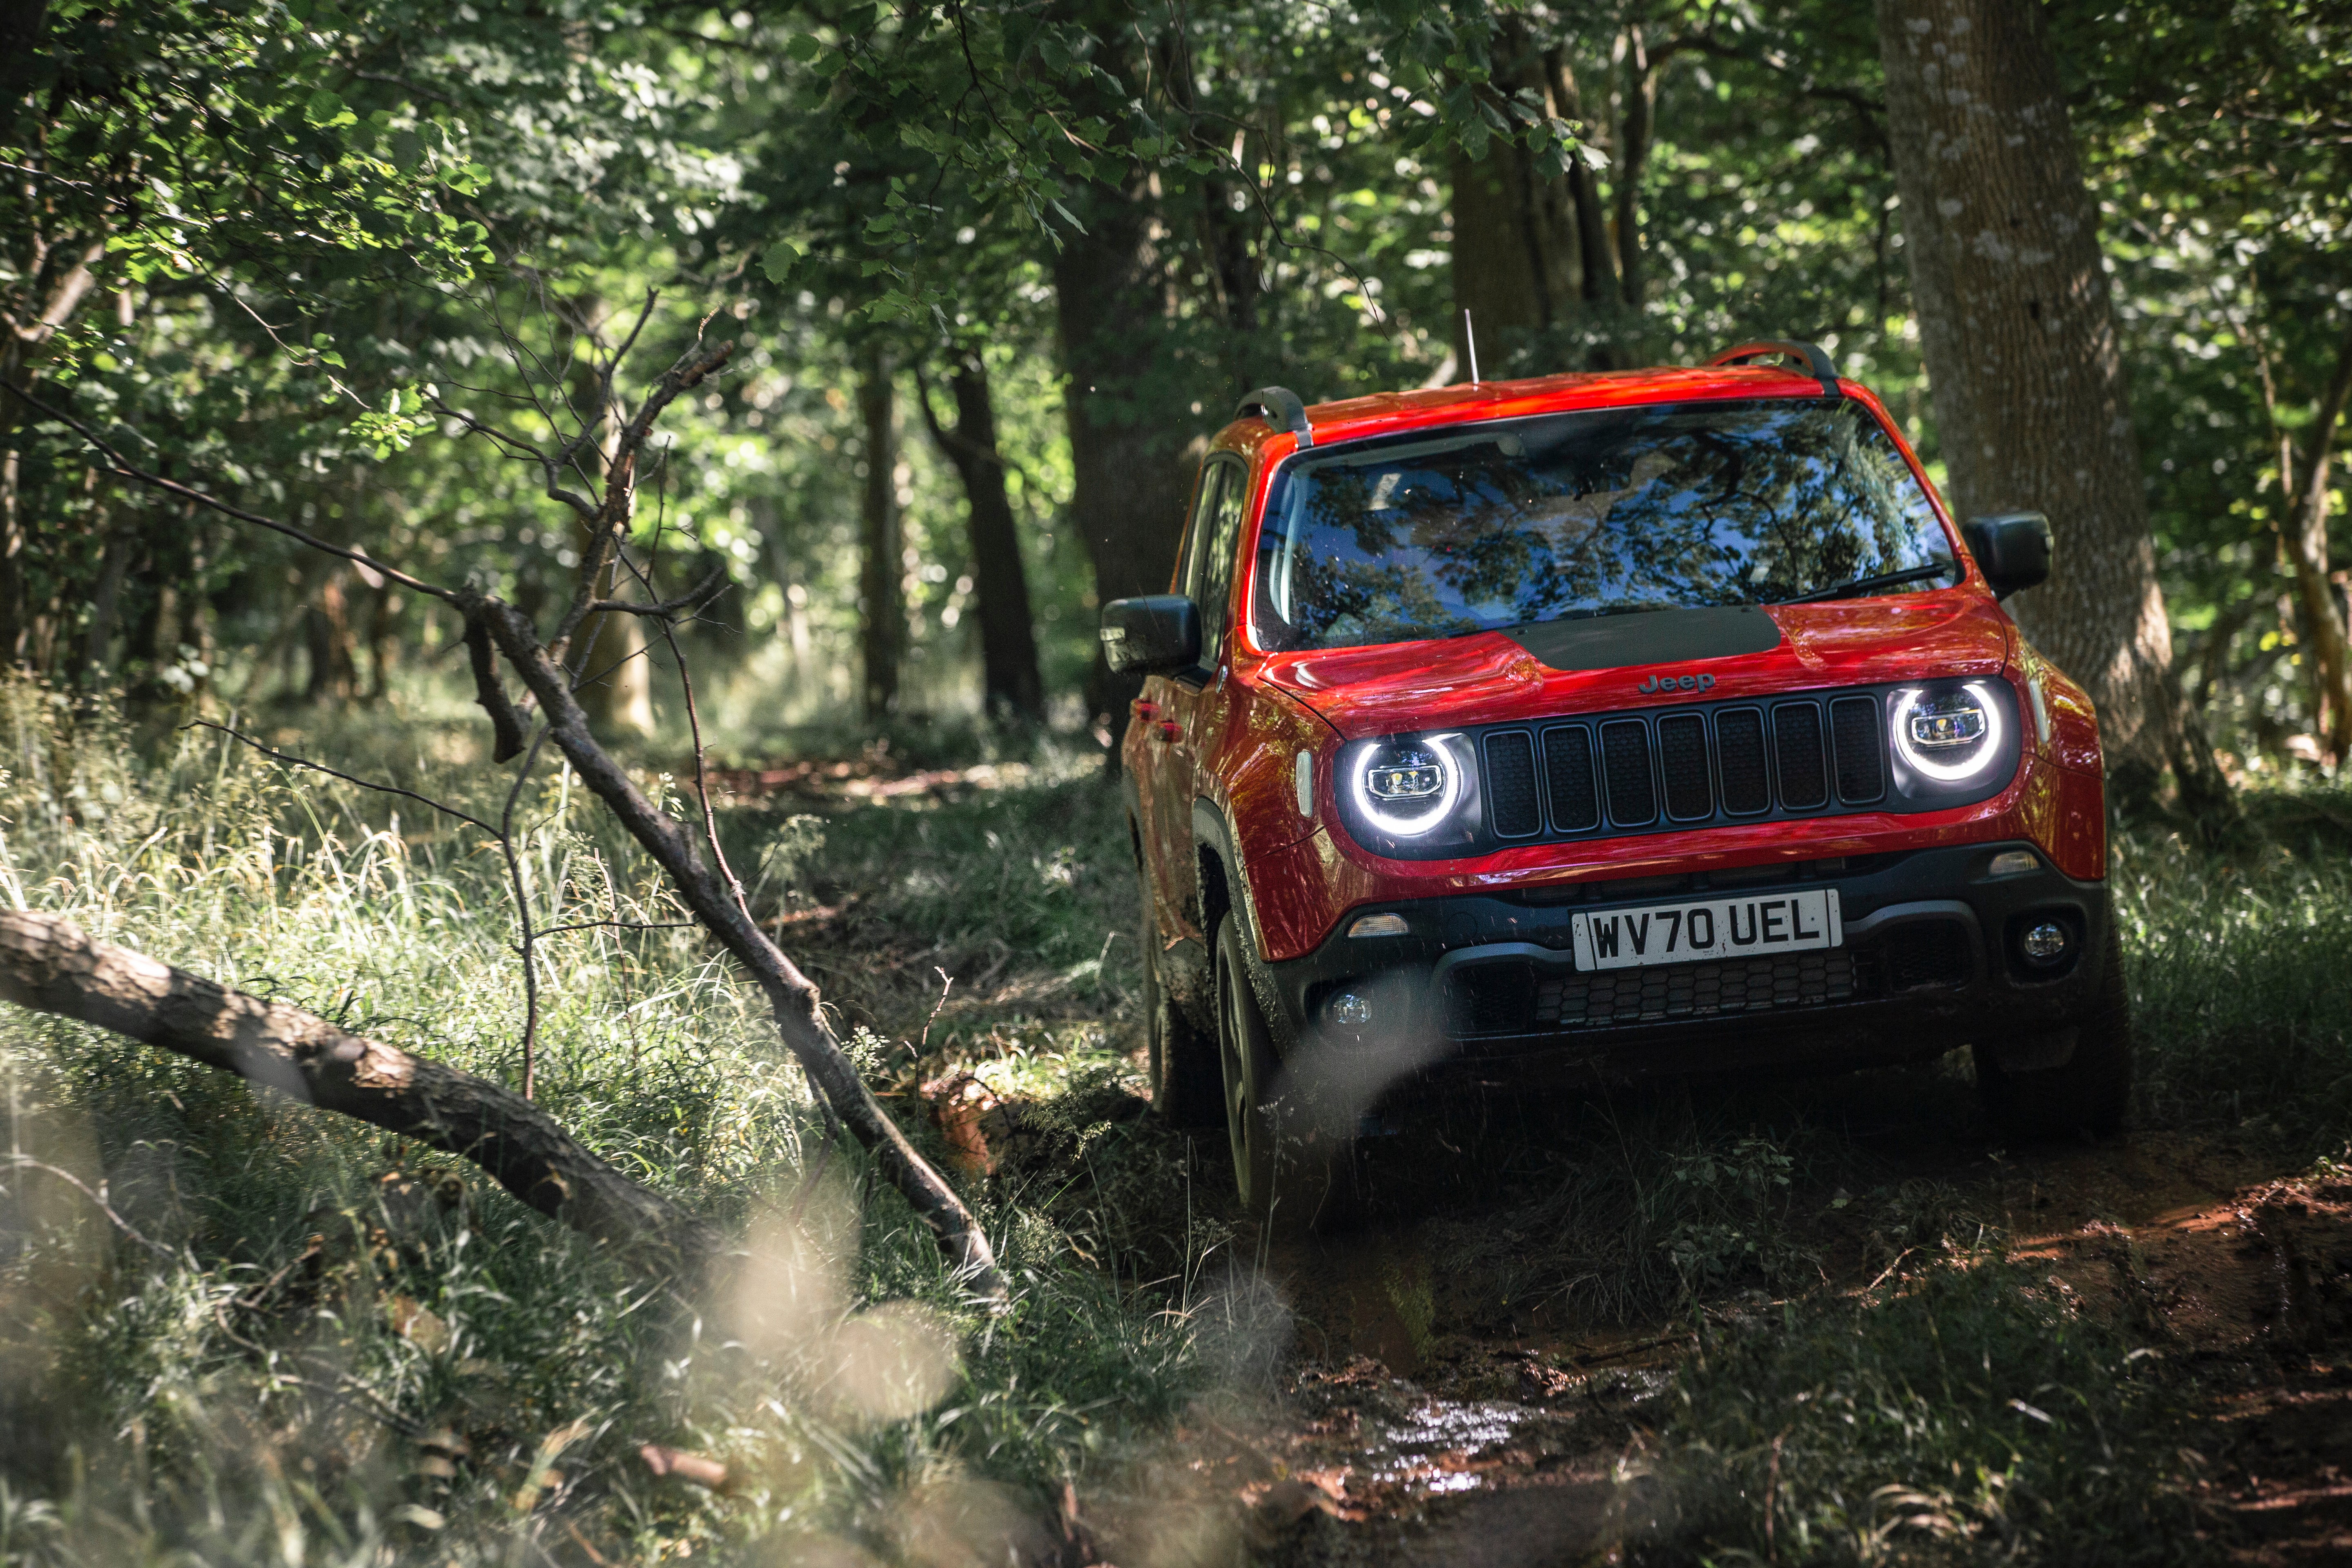 In the Renegade the badge 4xe means ‘four-wheel drive by e’ for ecology